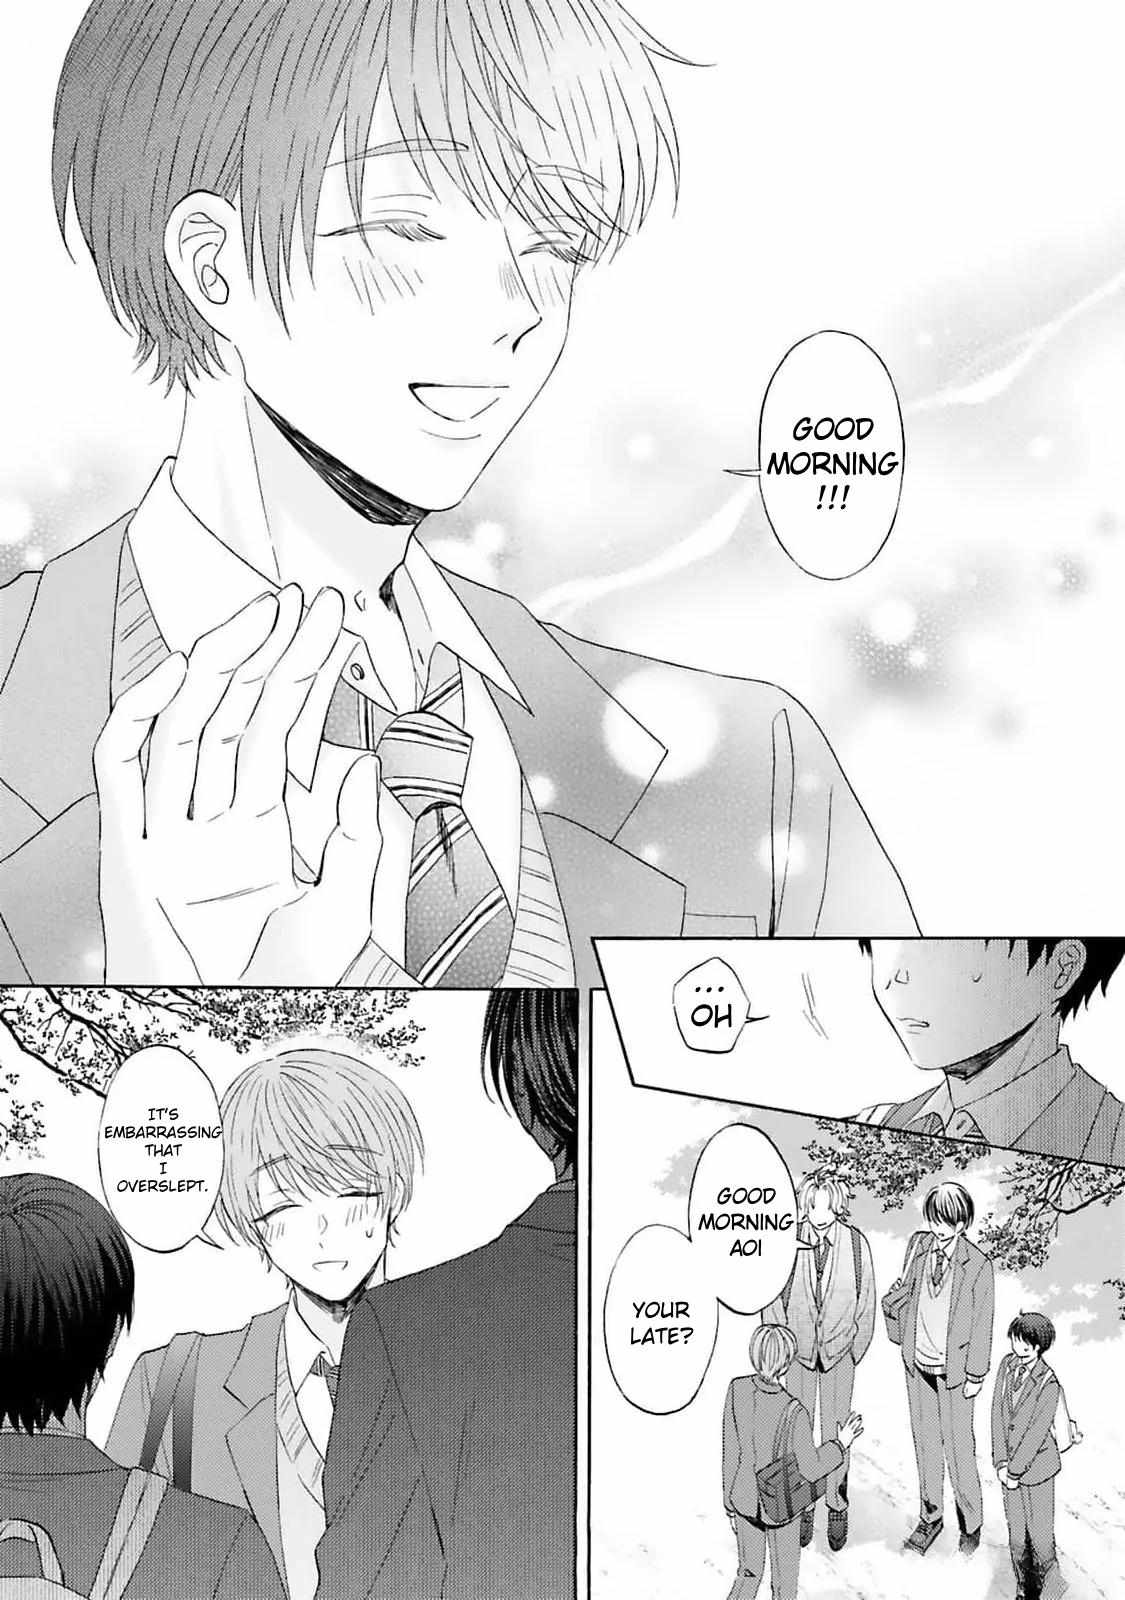 My Cutie Pie -An Ordinary Boy And His Gorgeous Childhood Friend- 〘Official〙 - 5 page 31-9dce540e